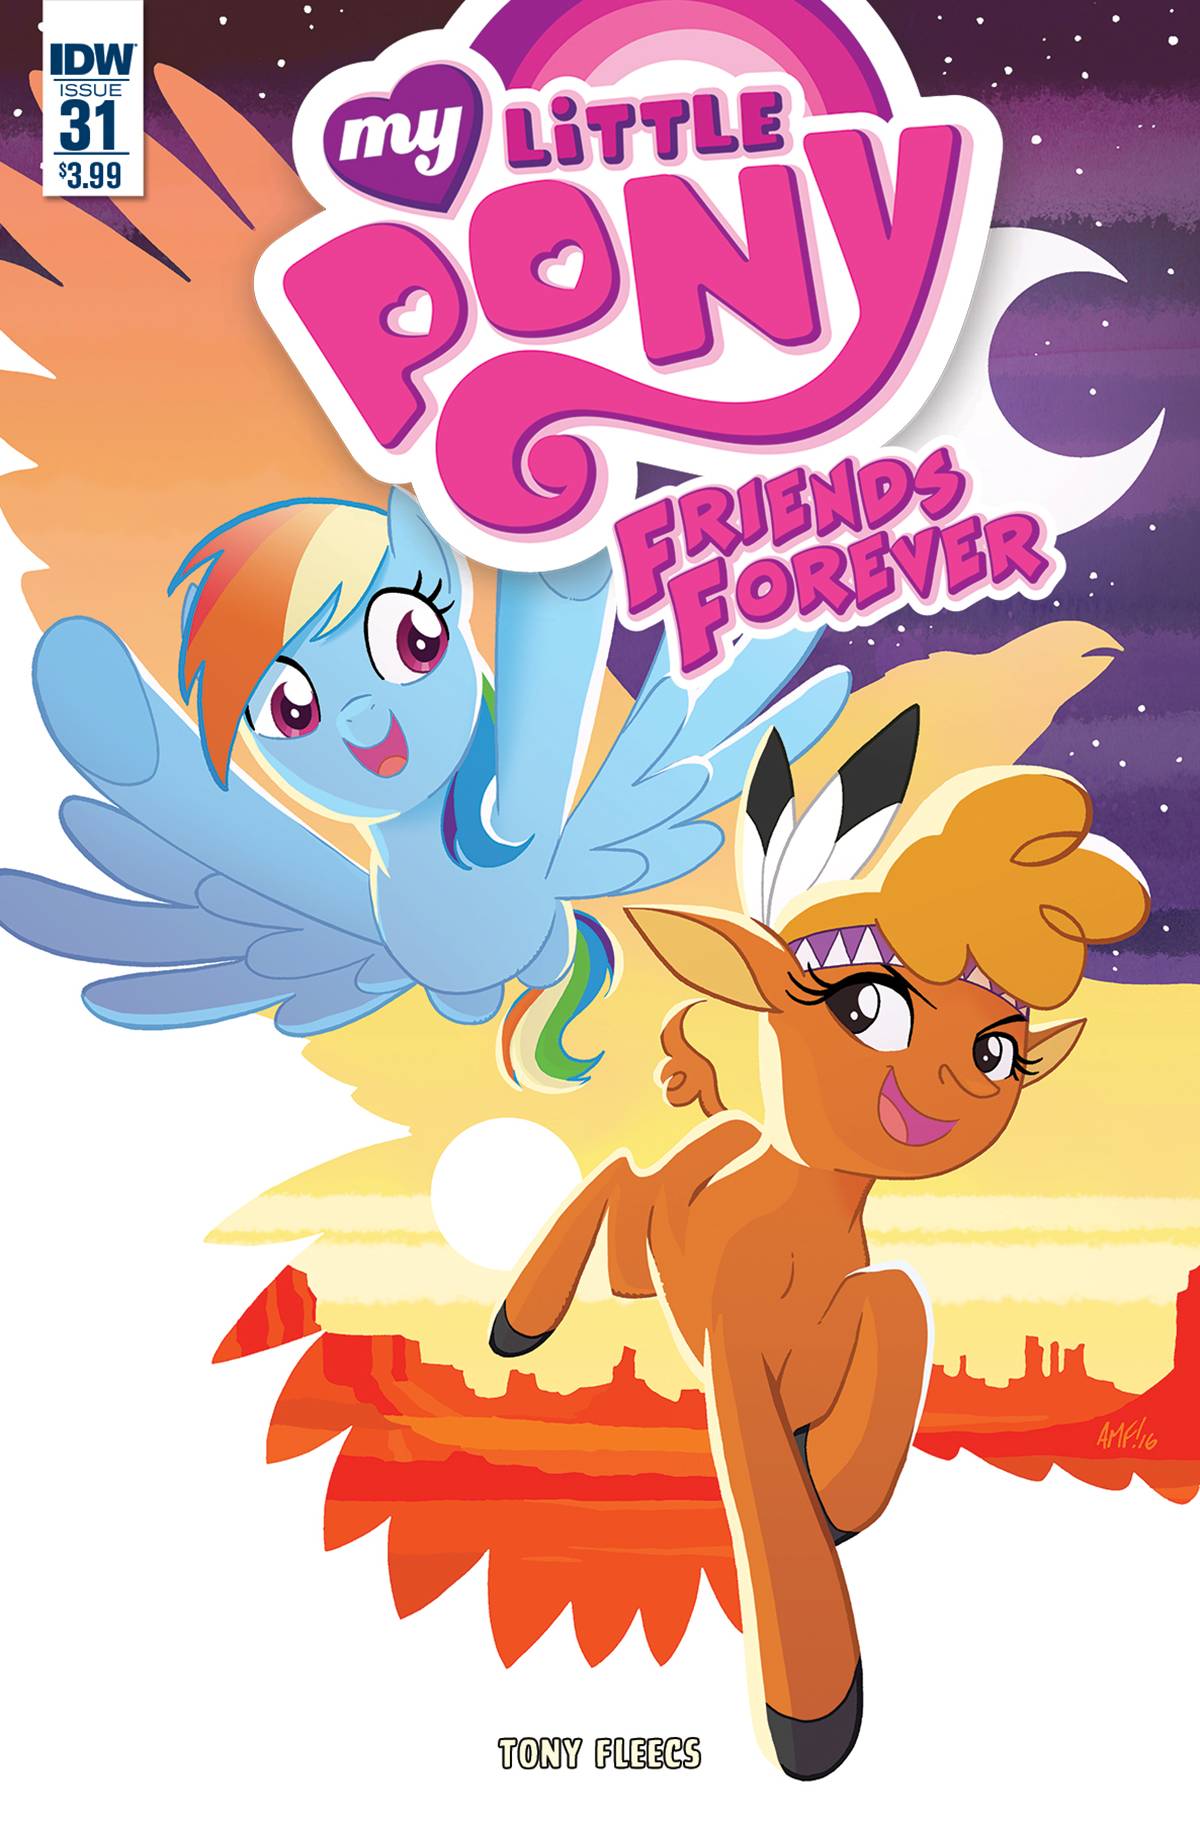 MY LITTLE PONY FRIENDS FOREVER #31